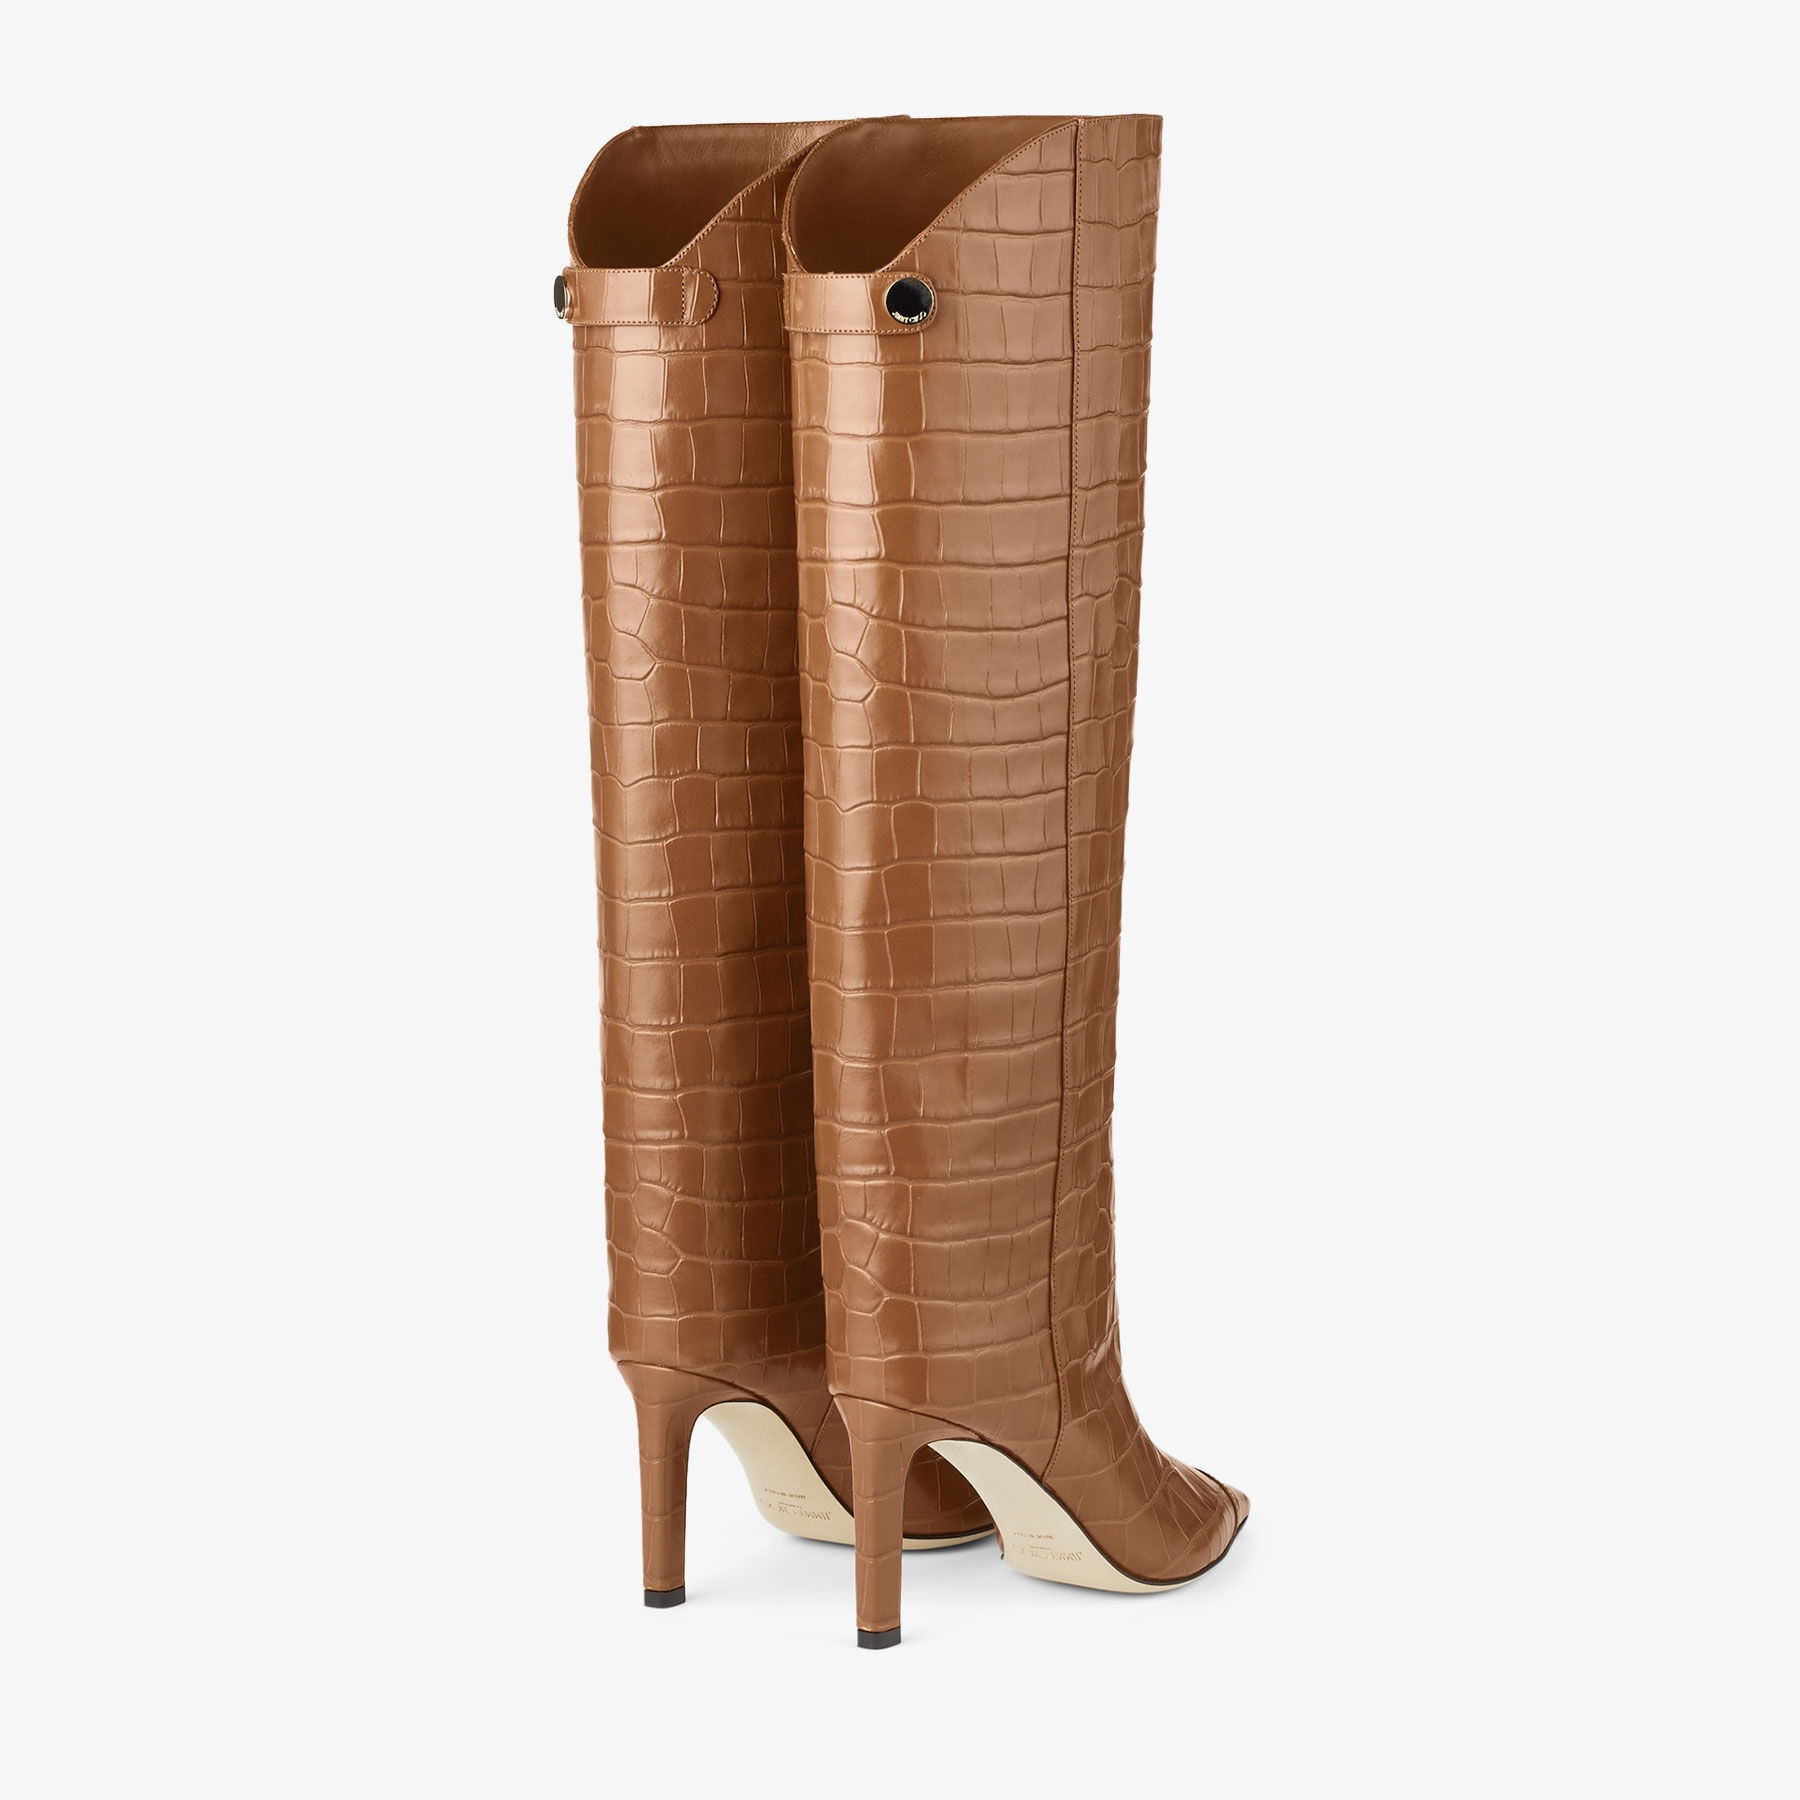 Alizze Knee Boot 85
Tan Croc-Embossed Leather Knee-High Boots - 6